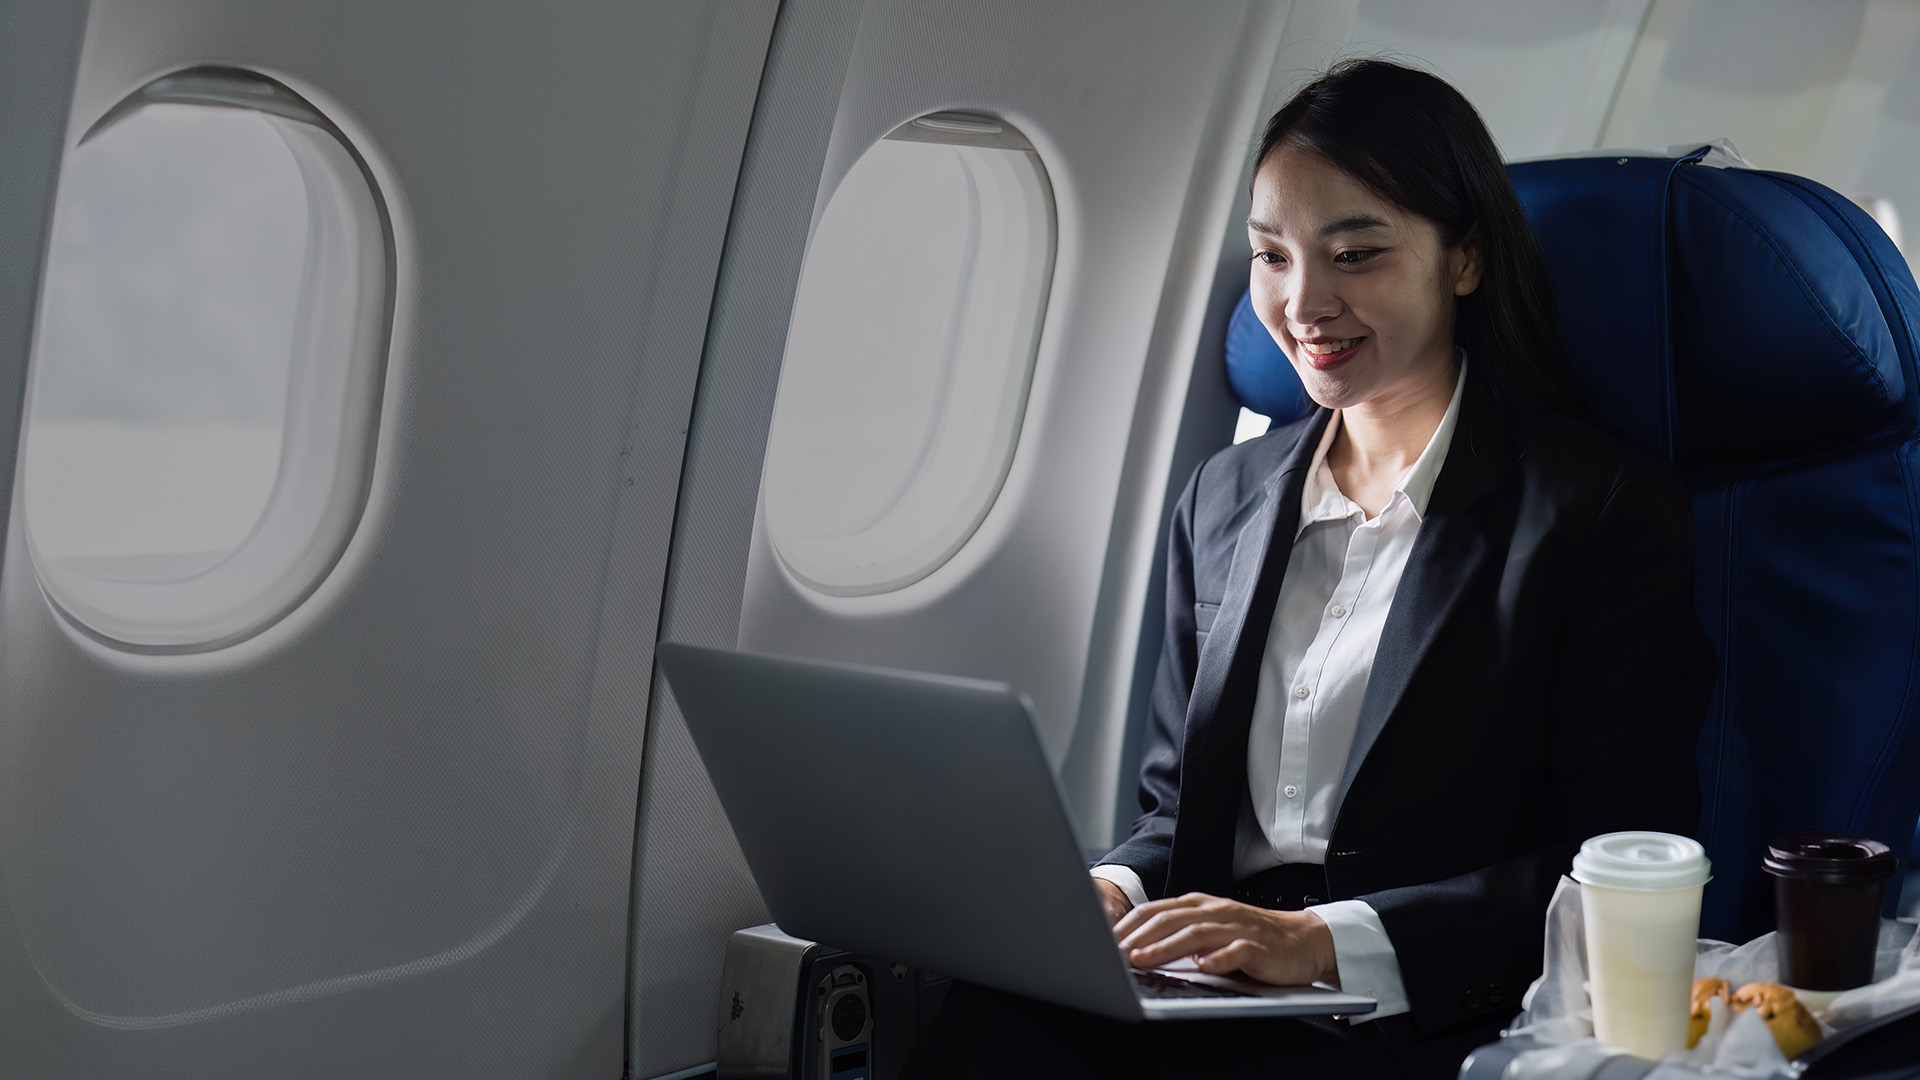 IT Infrastructure Transformation Solutions for the UK’s Inflight Services Provider